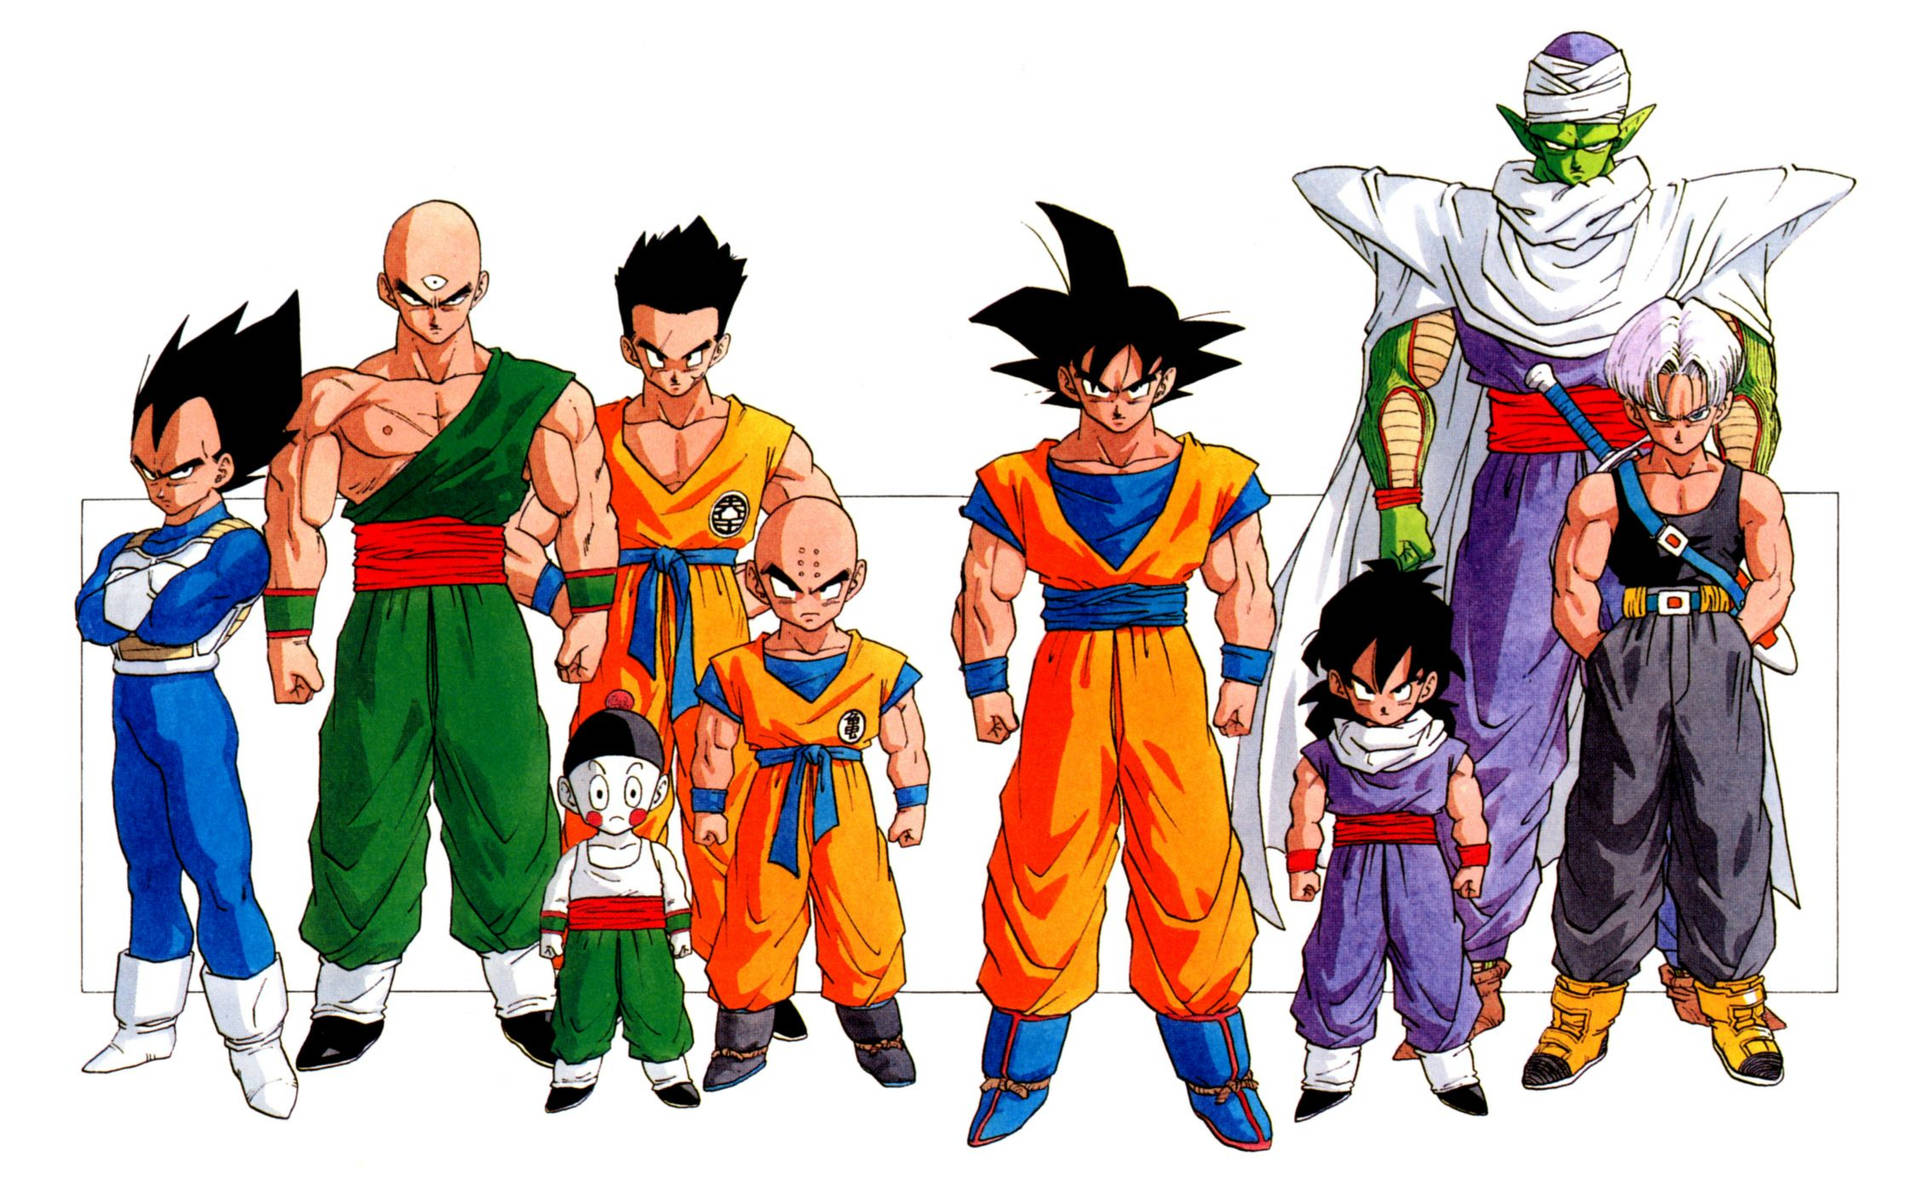 Cool Dragon Ball Z On White Background